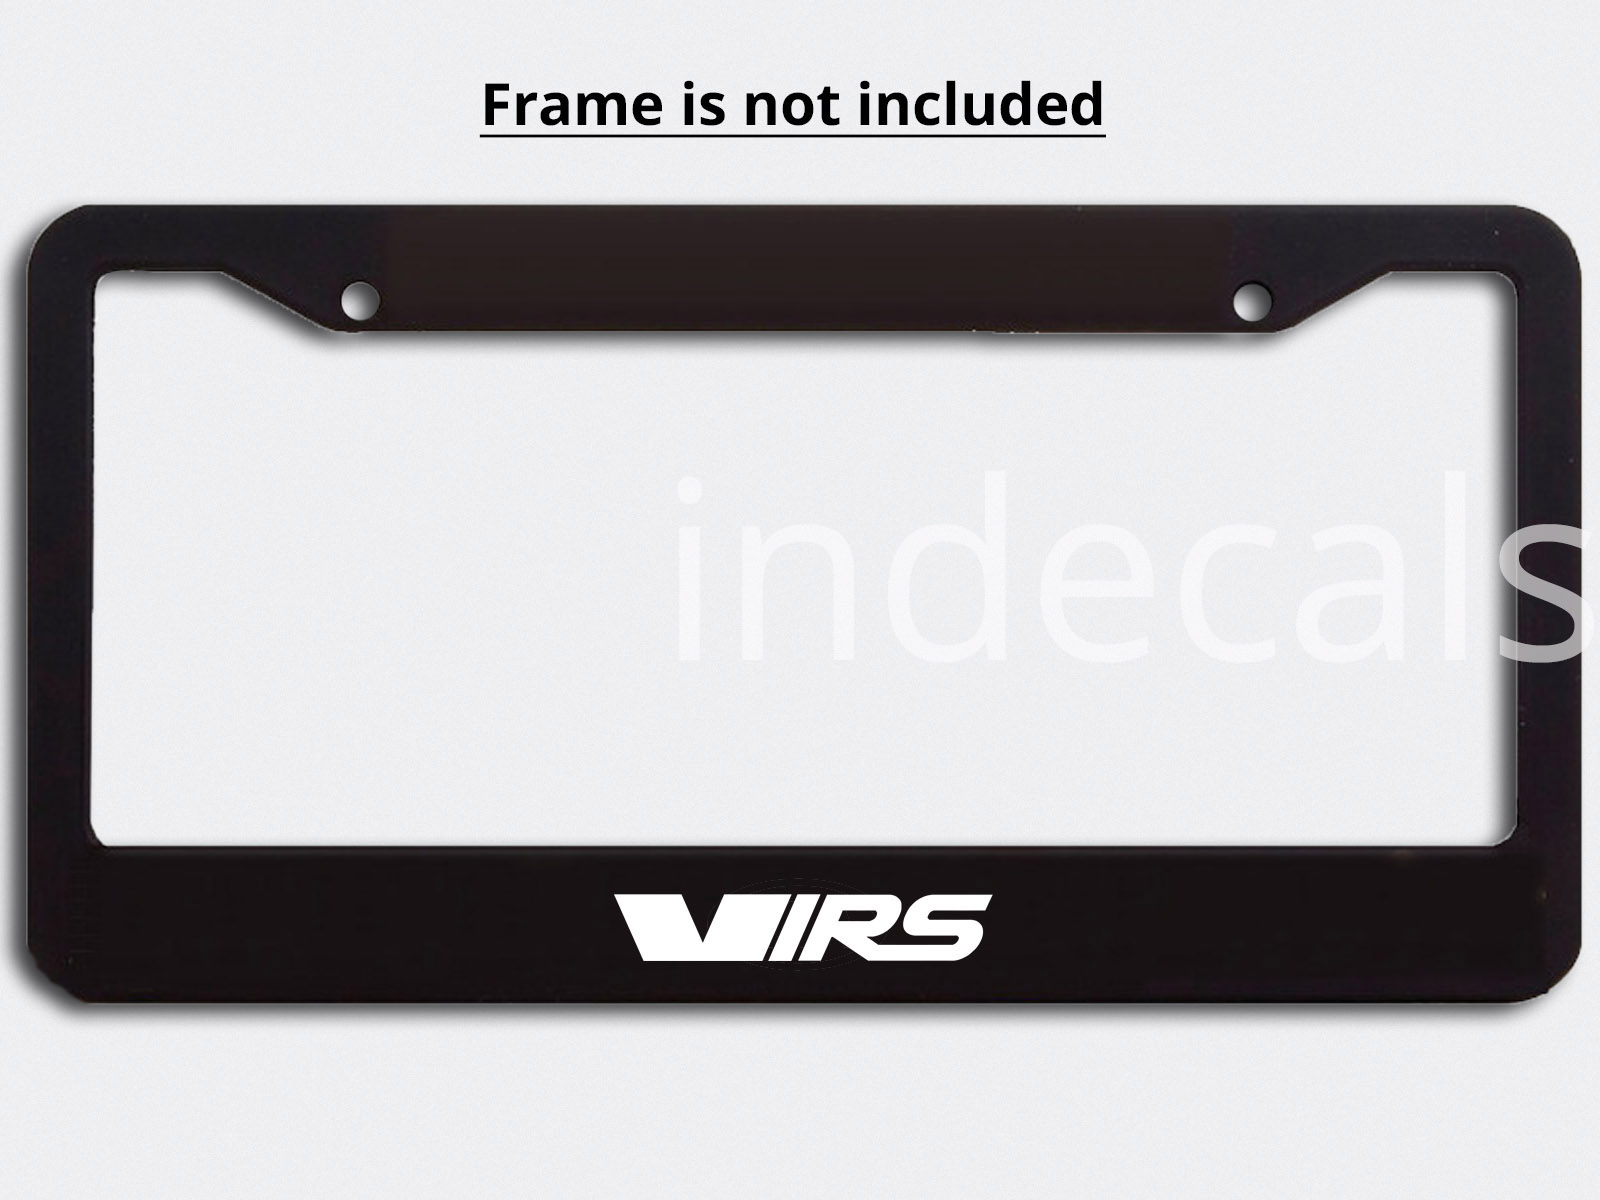 3 x Skoda RS Stickers for License Plate Frame - White